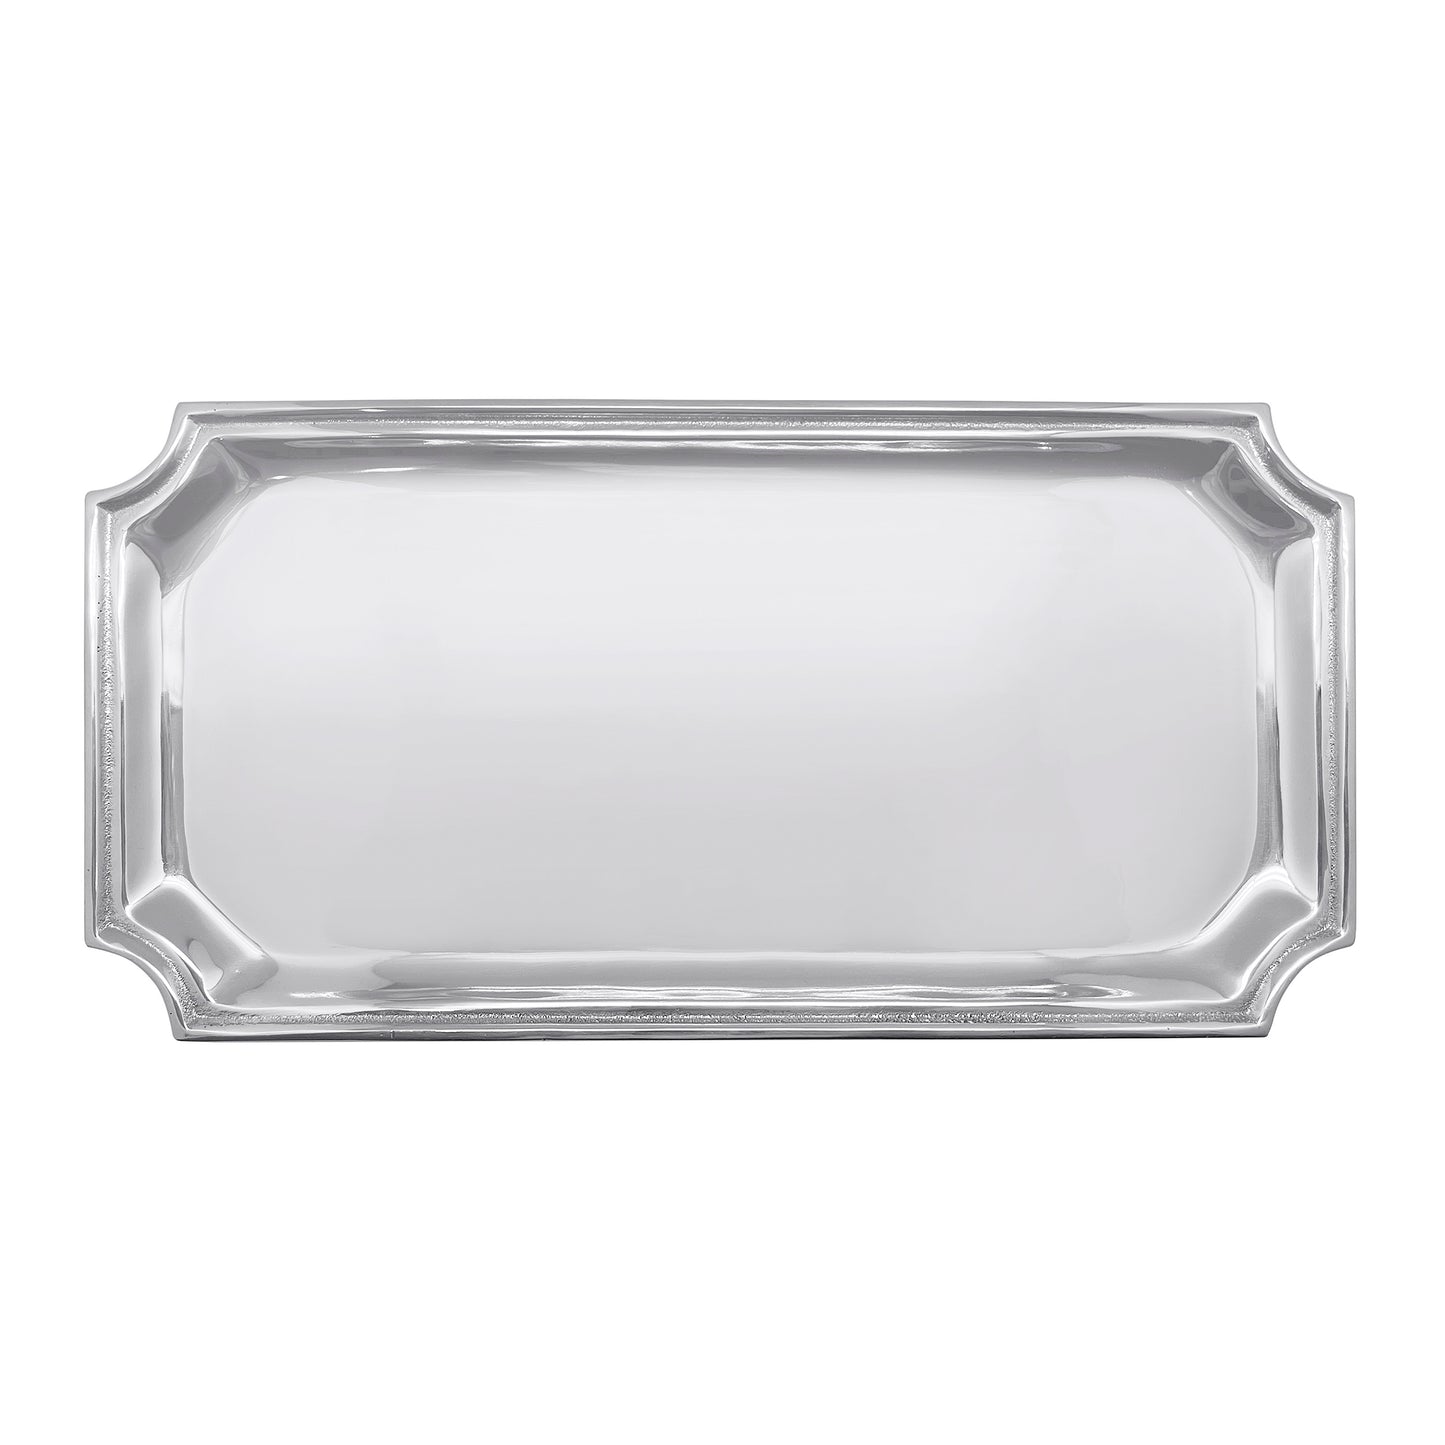 Silver Tray With No Handles